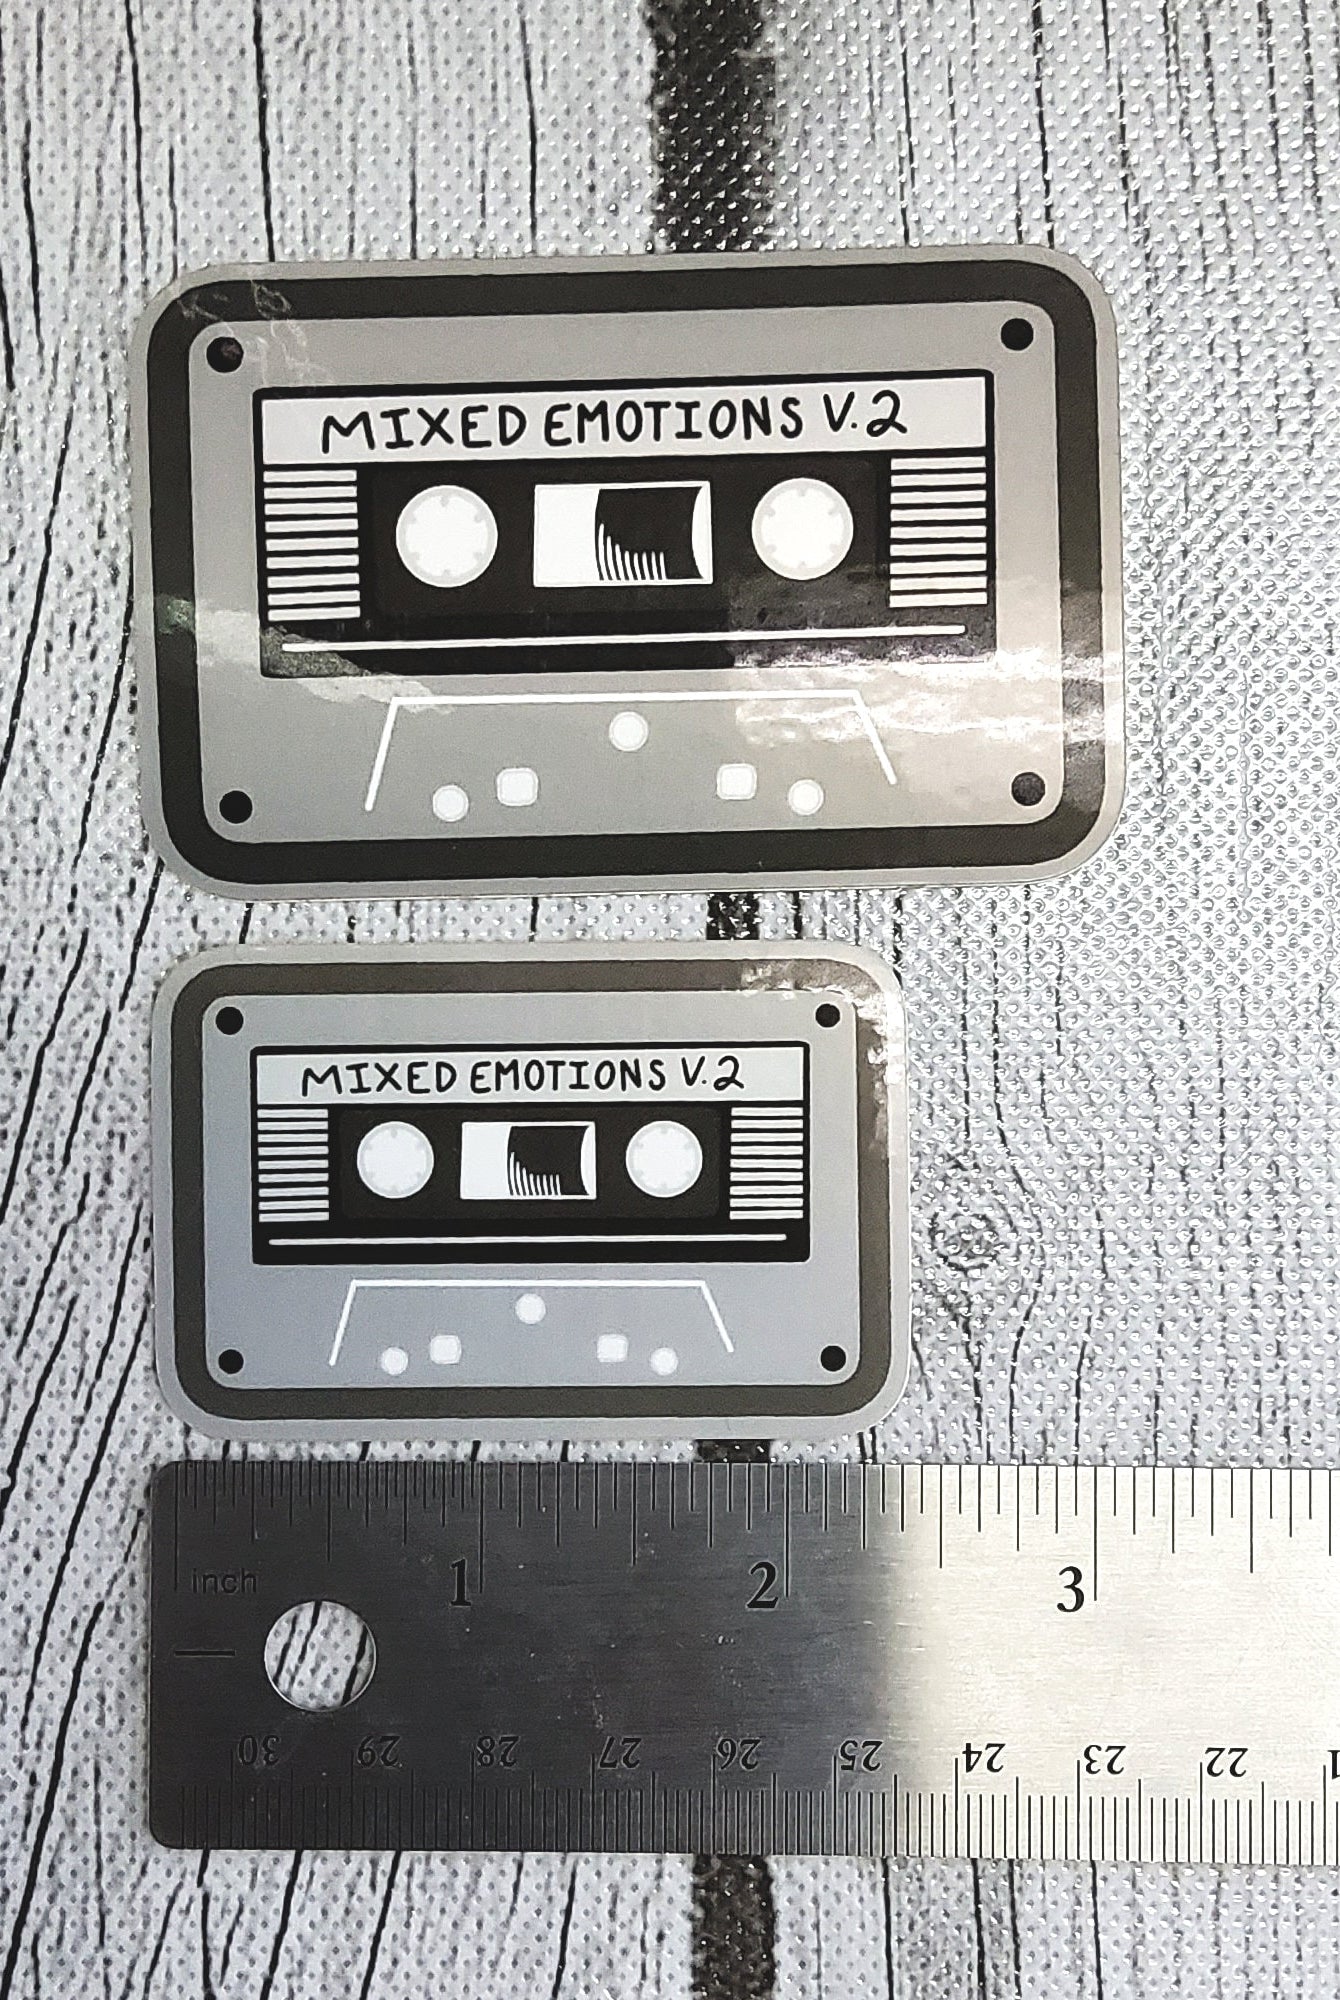 GLOSSY STICKER: Gray Mixed Emotions Volume 2 Cassette Tape Sticker , Cassette Sticker , Mix Tape , Mix Tape Stickers , 80s Vibe Sticker